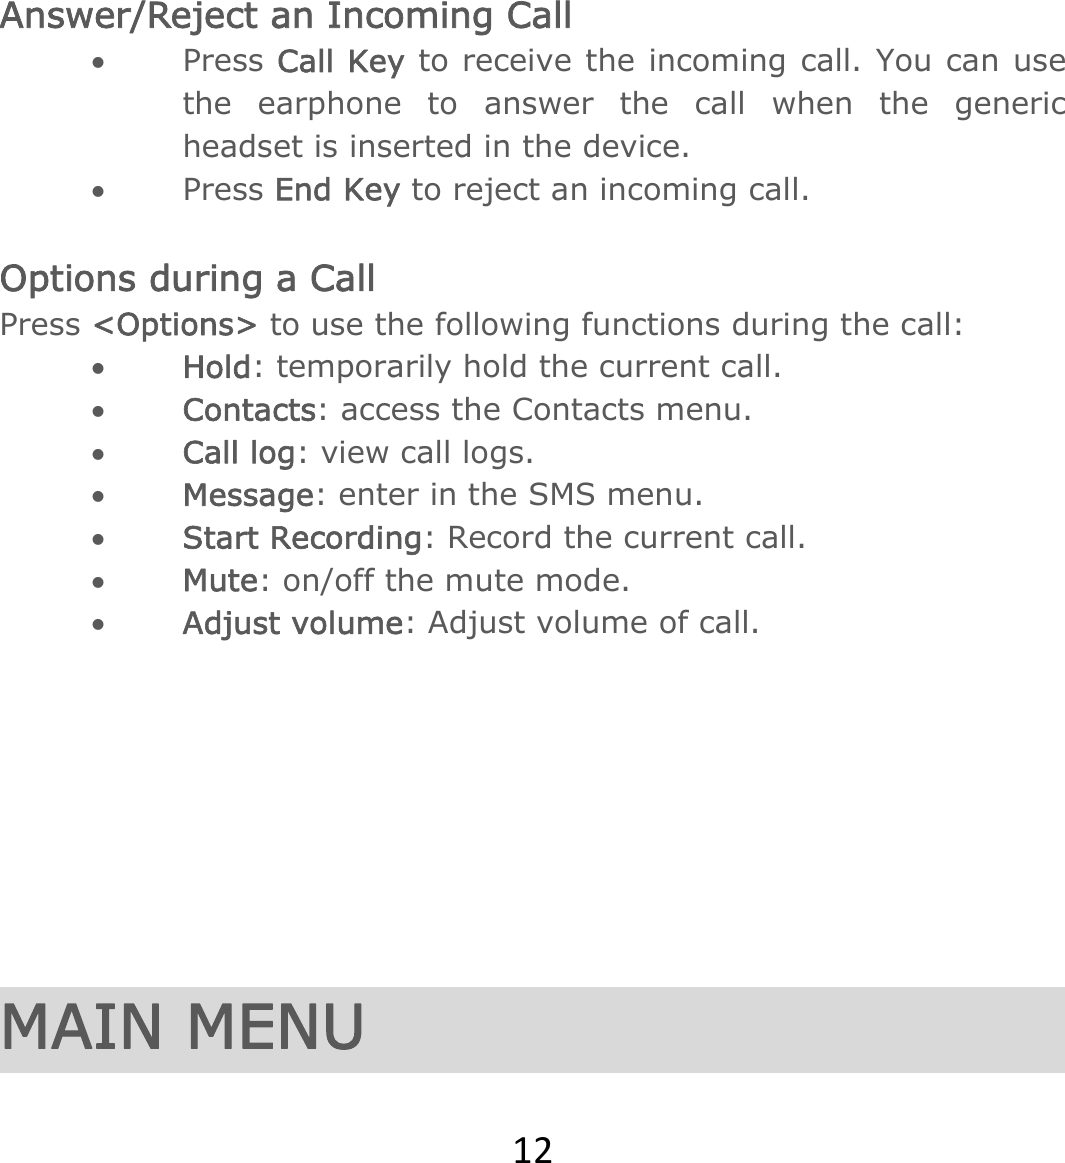 12Answer/Reject an Incoming Call • Press Call Key to receive the incoming call. You can use the earphone to answer the call when the generic headset is inserted in the device.   • Press End Key to reject an incoming call.  Options during a Call   Press &lt;Options&gt; to use the following functions during the call: • Hold: temporarily hold the current call. • Contacts: access the Contacts menu.  • Call log: view call logs. • Message: enter in the SMS menu. • Start Recording: Record the current call. • Mute: on/off the mute mode. • Adjust volume: Adjust volume of call.         MAIN MENU 